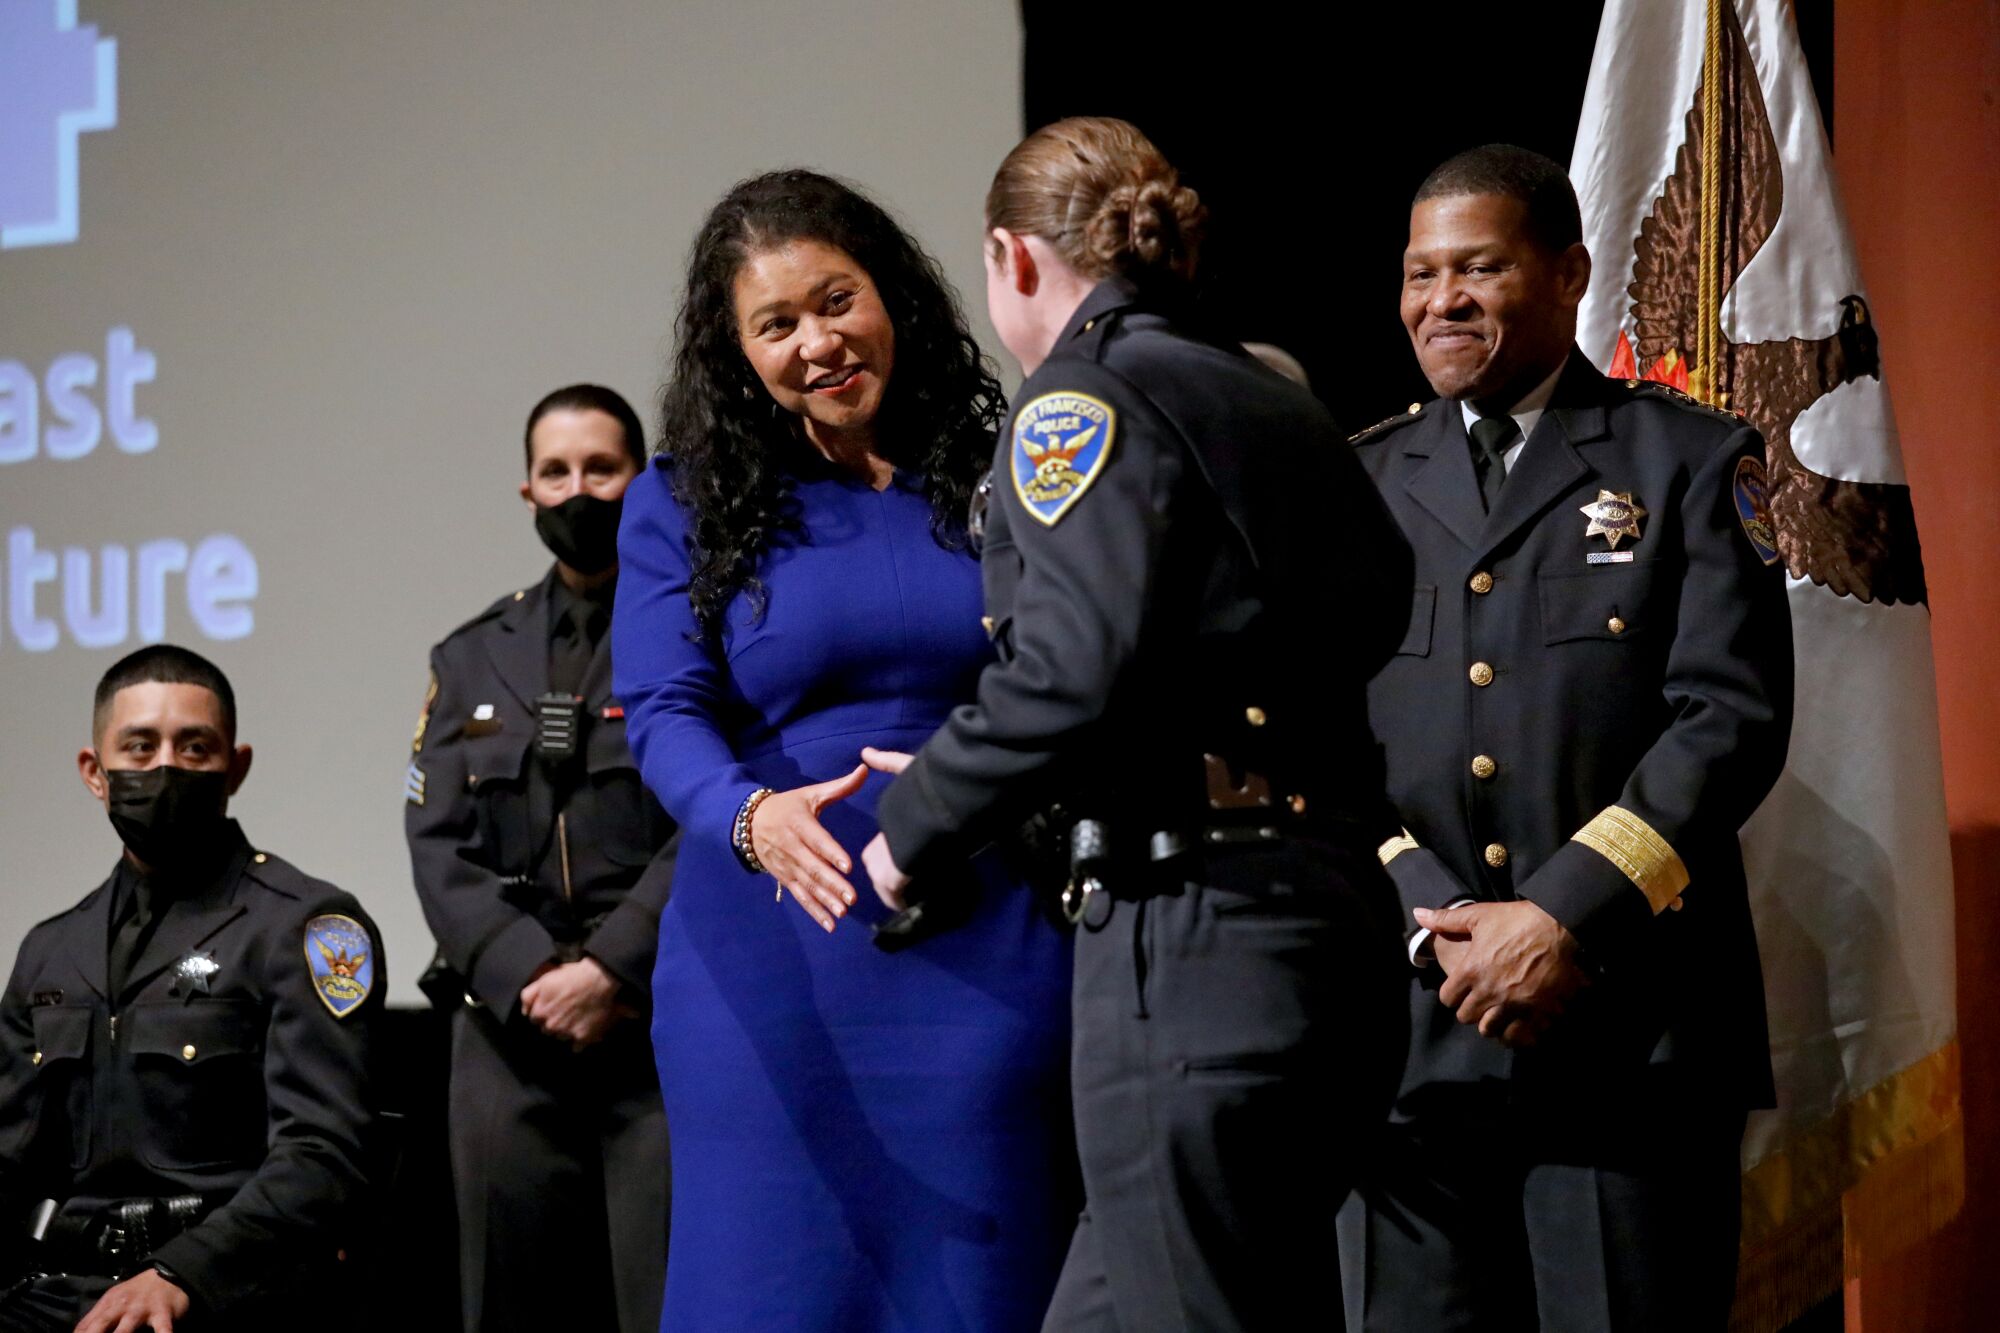 London Breed shakes the hand of a police officer while sharing the stage with three other officers